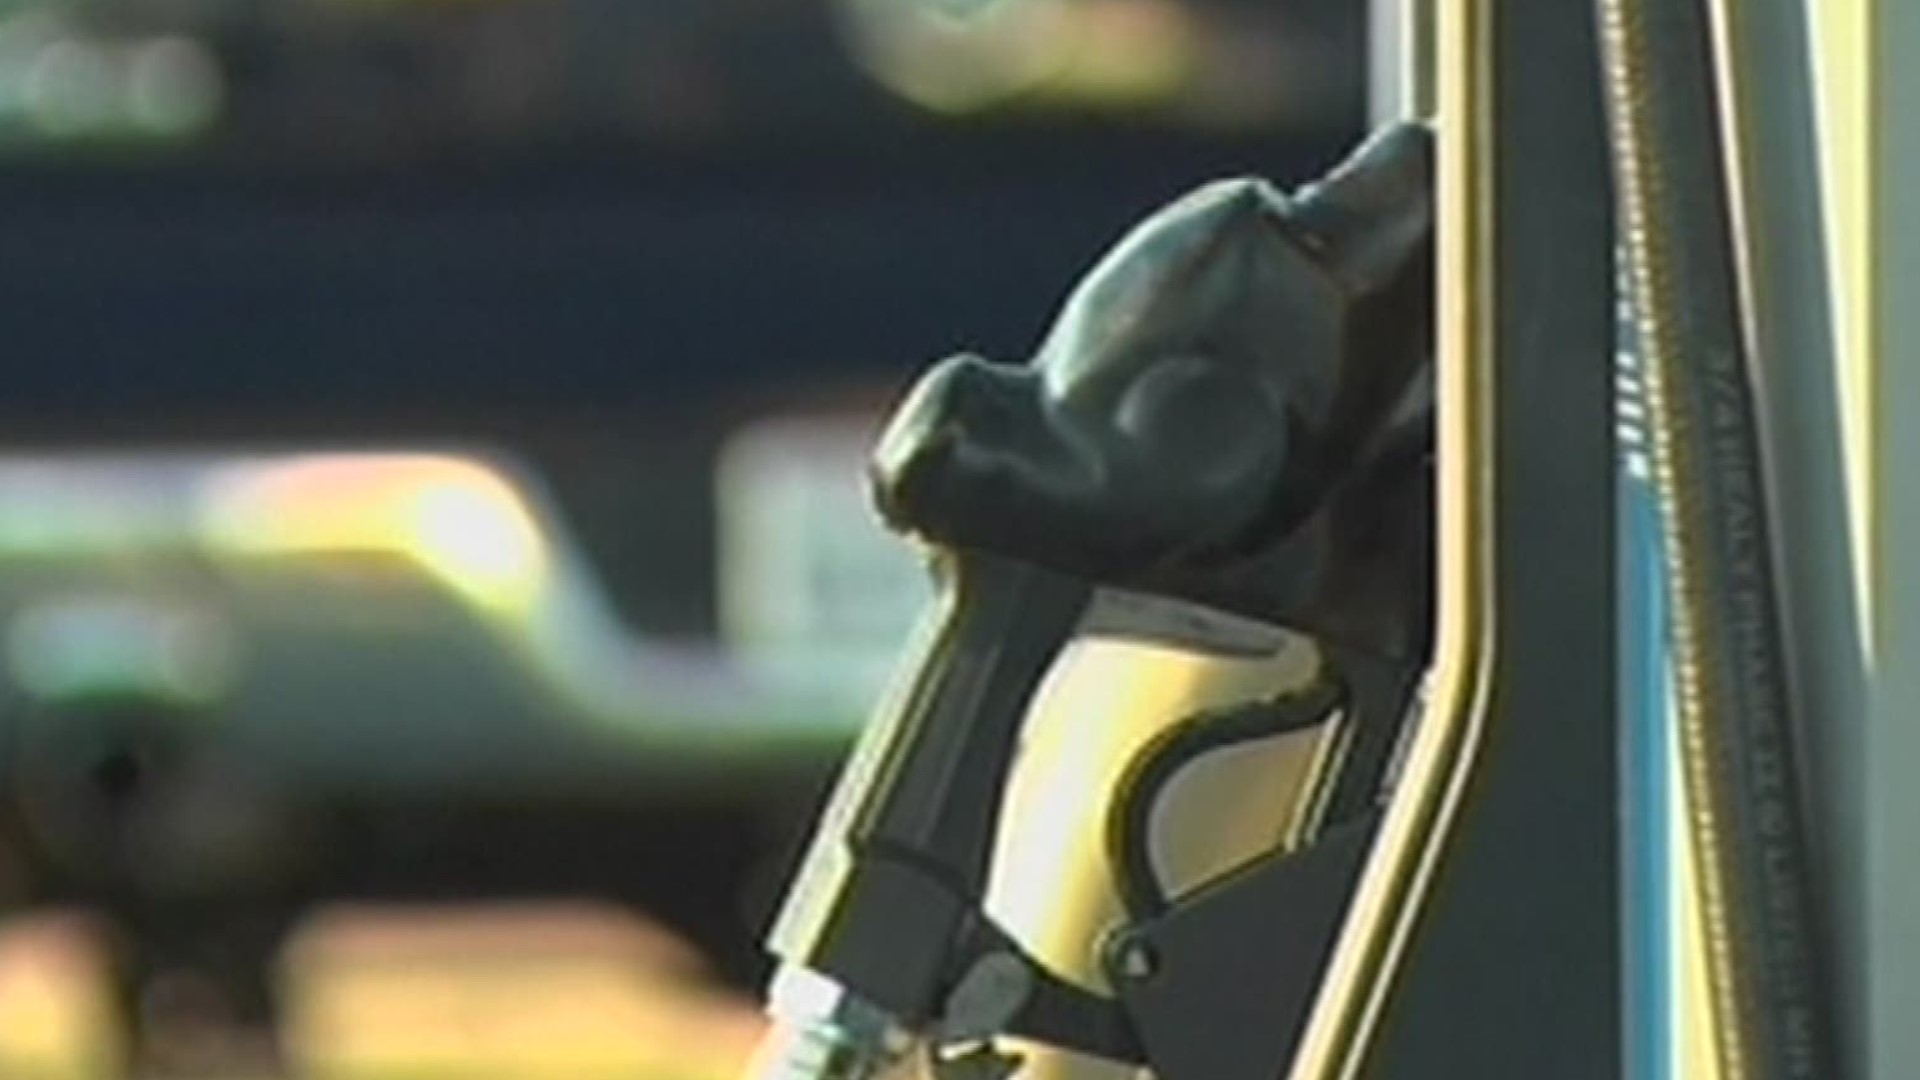 According to AAA, Georgia gas prices hit a new 2019 high on Sunday. It's up 23 cents since February 14th.